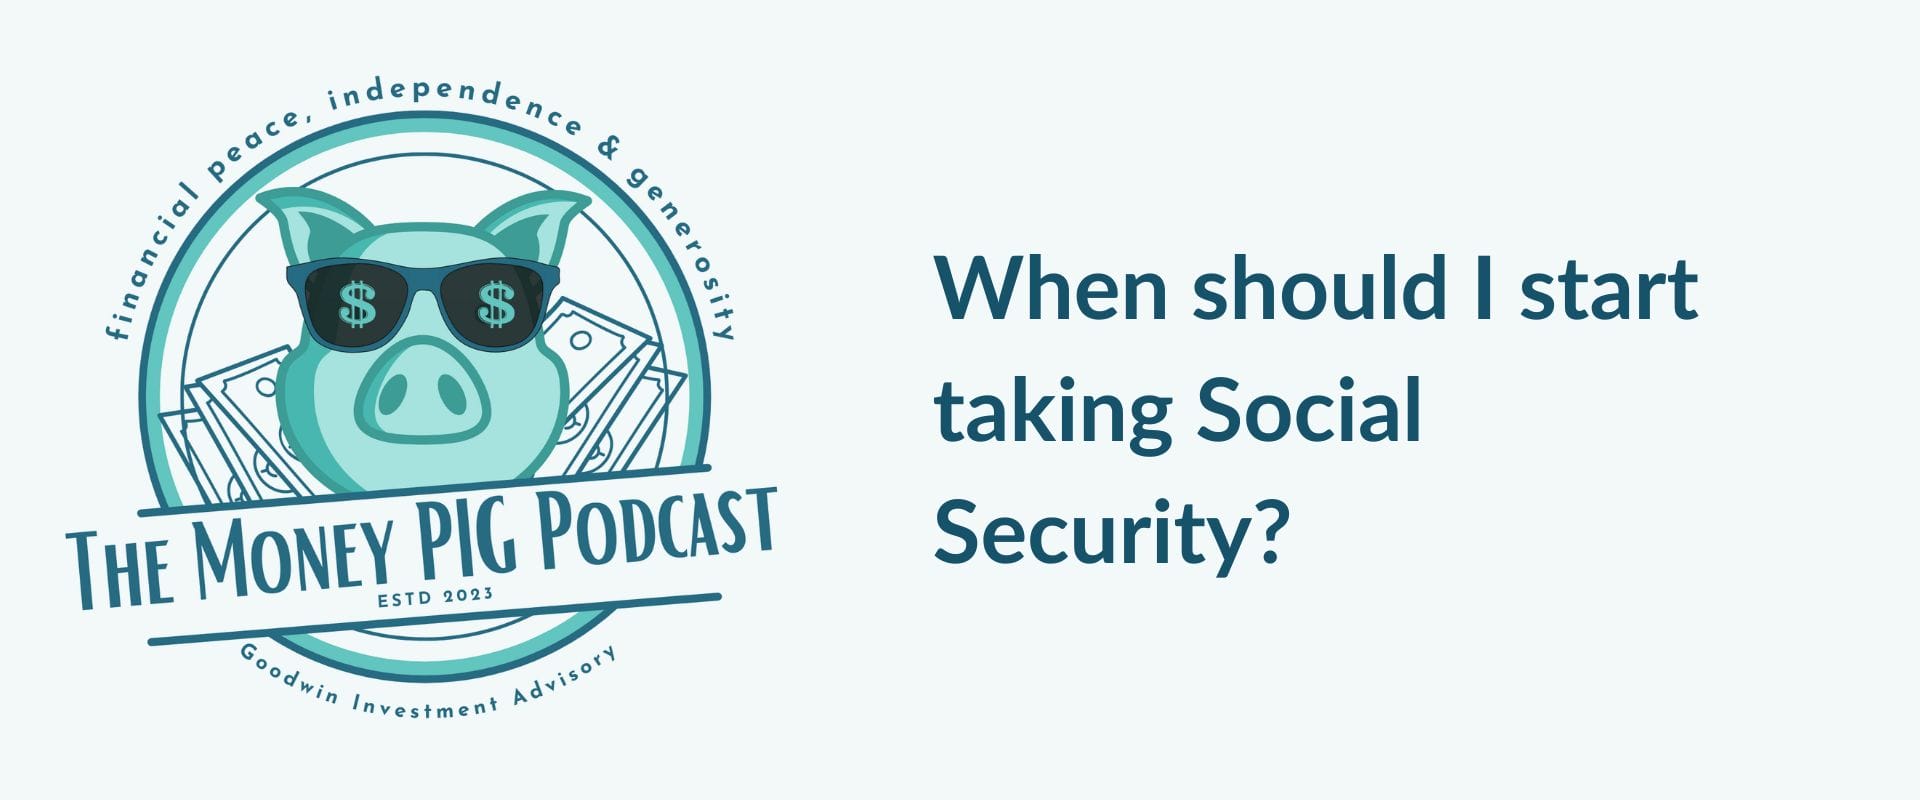 When should I start taking Social Security?